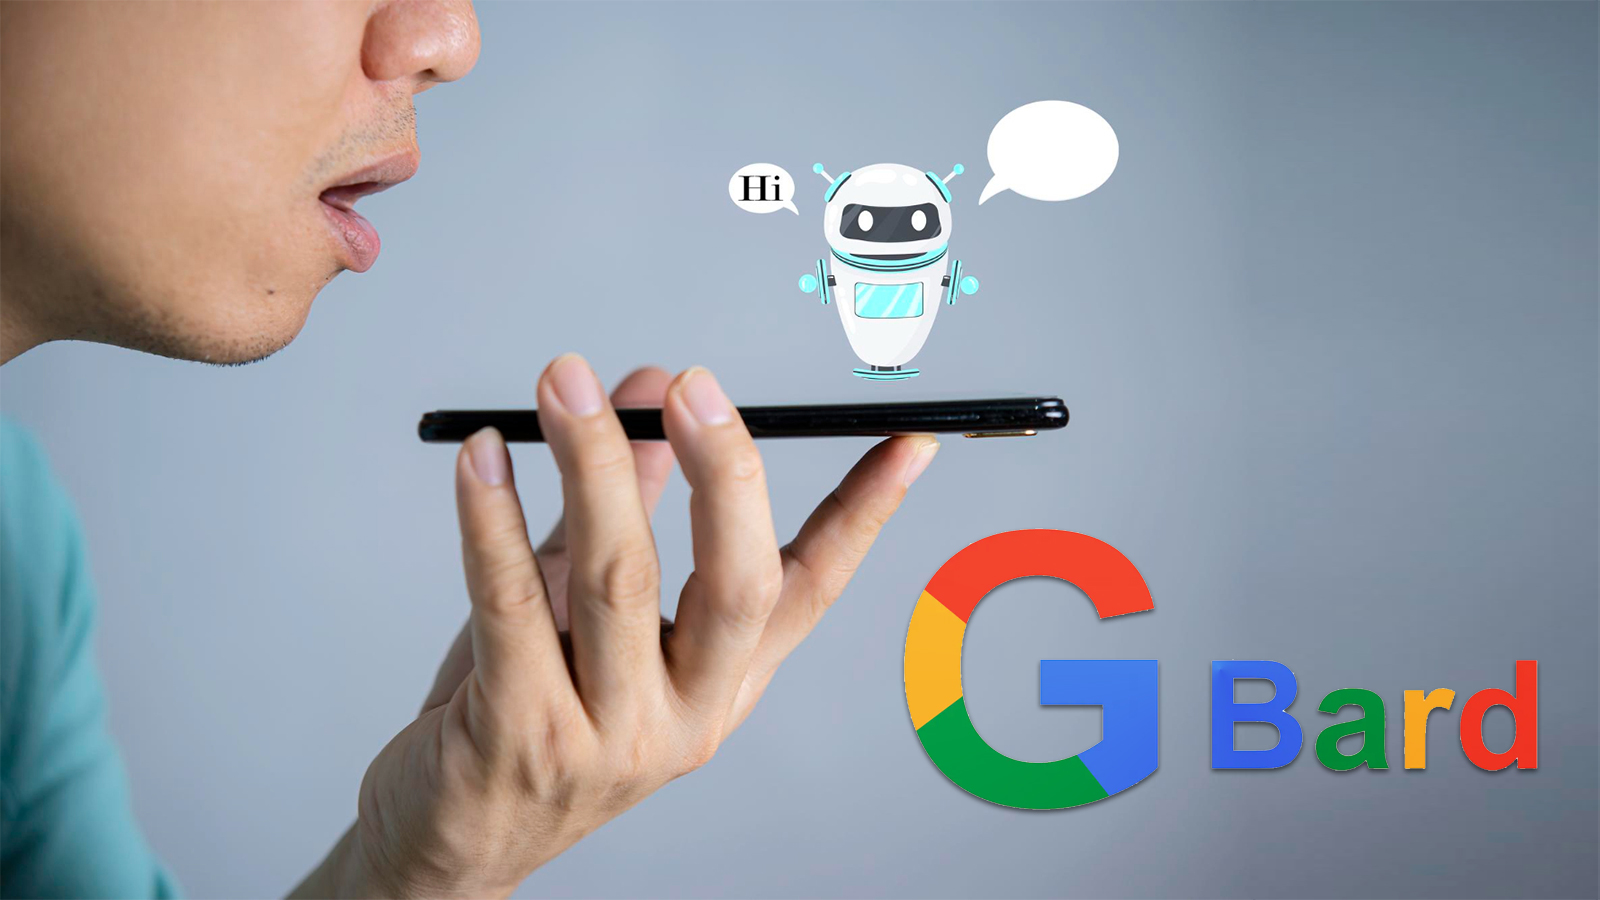 Google integrates Bard chatbot with its apps and services